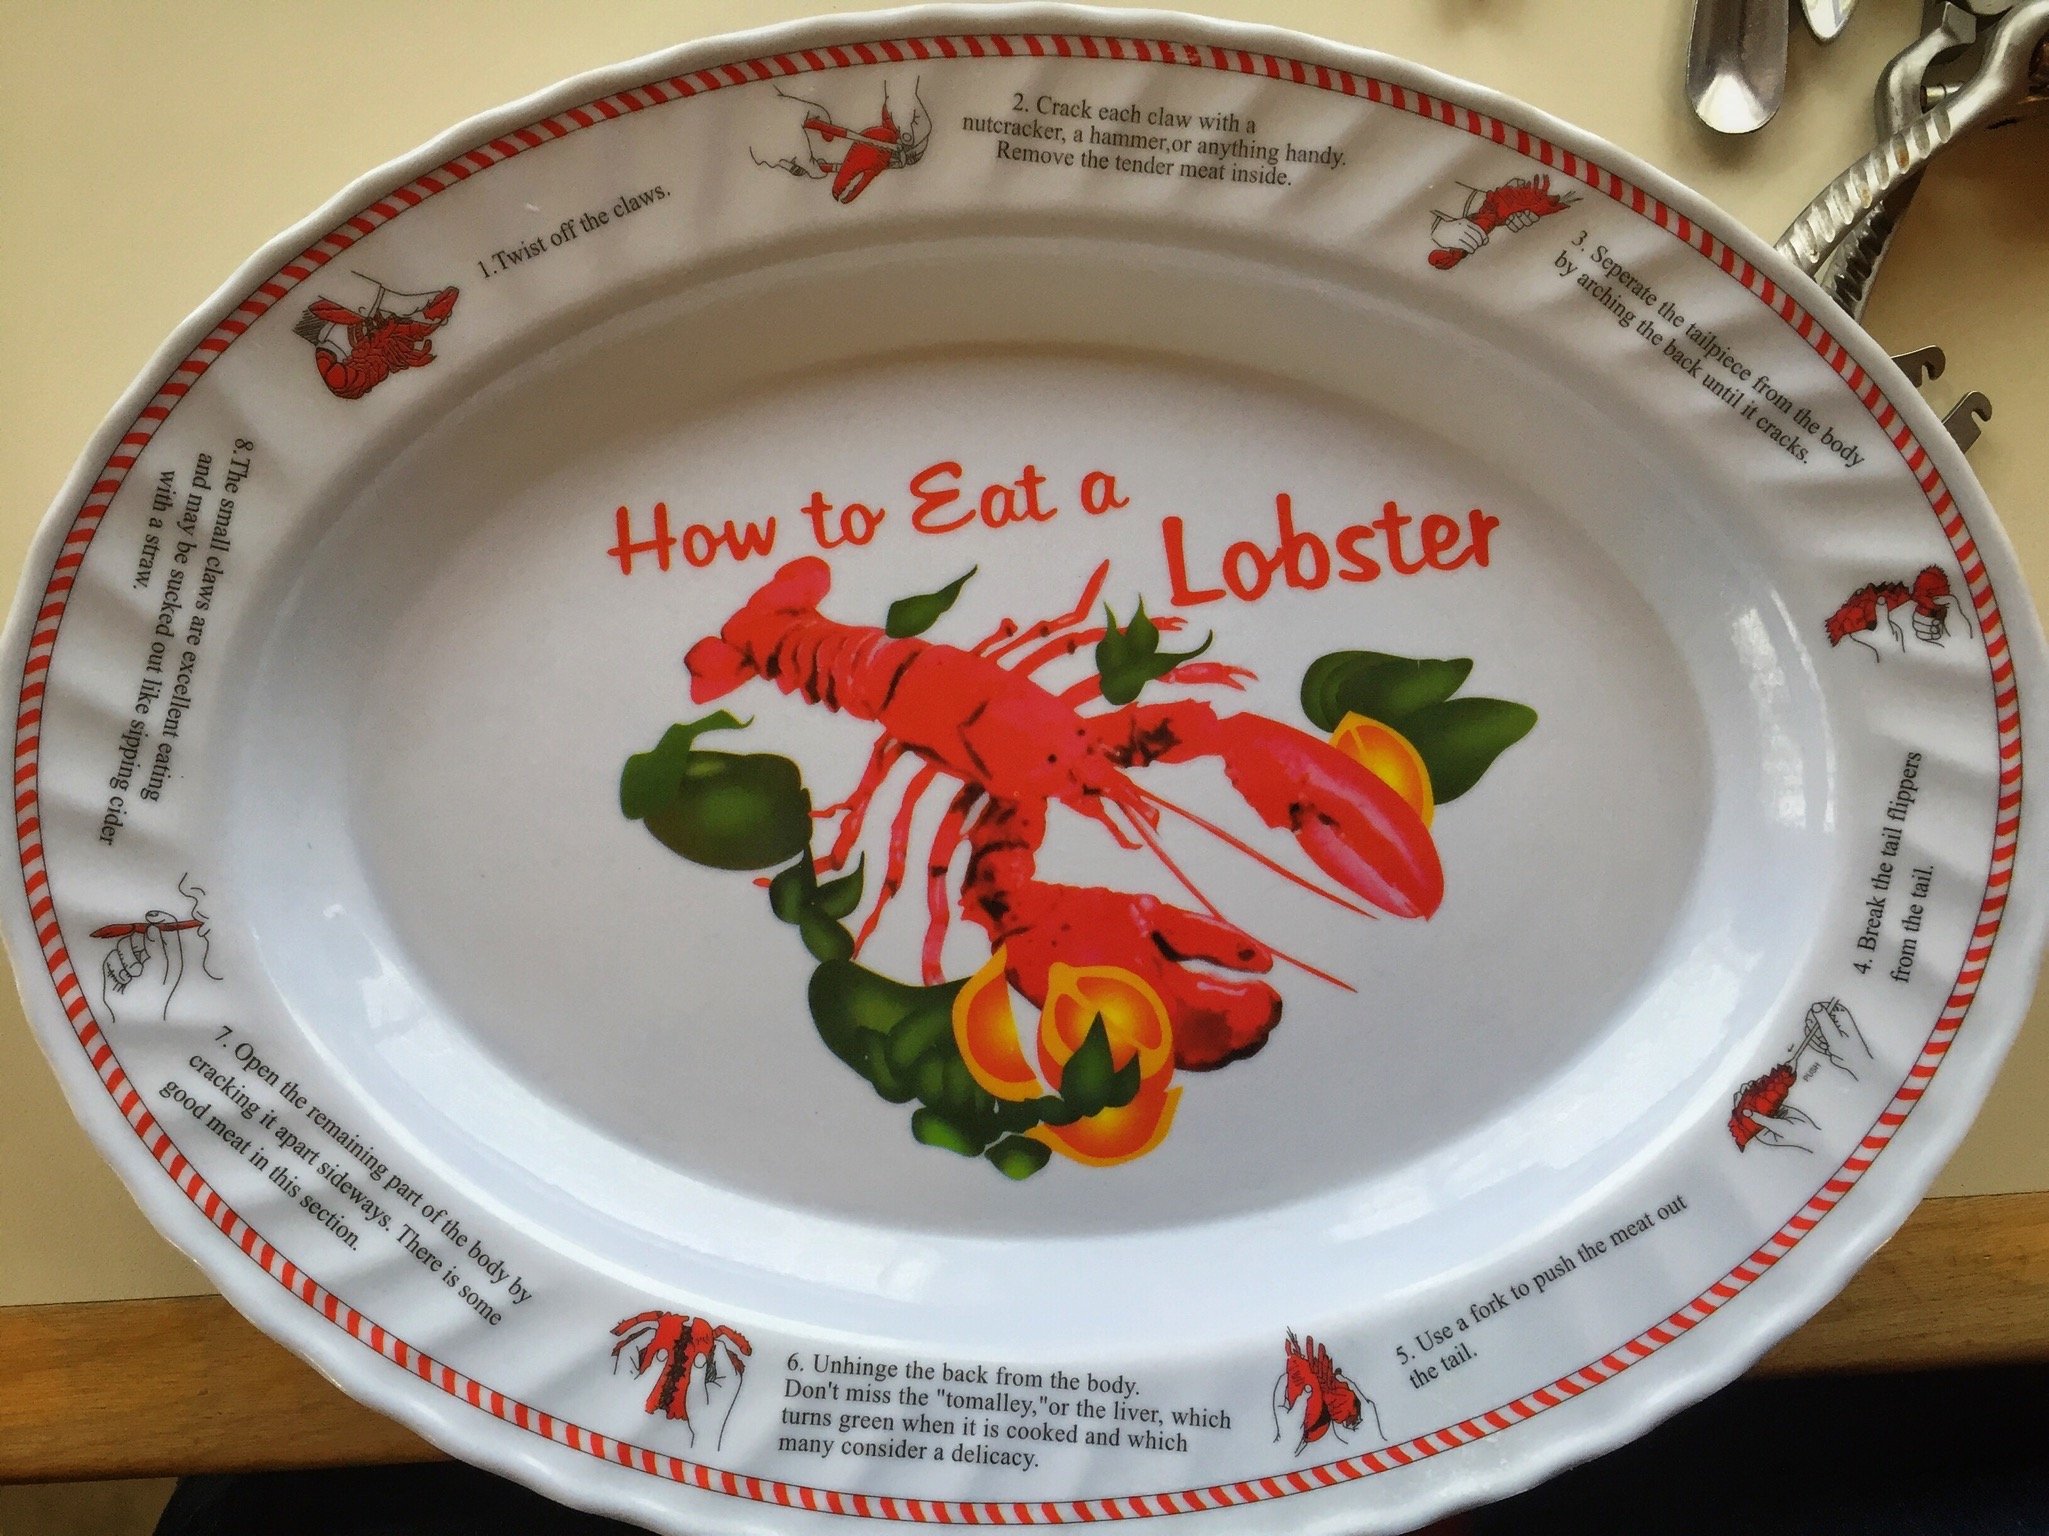 Instructions on How to Eat a Lobster